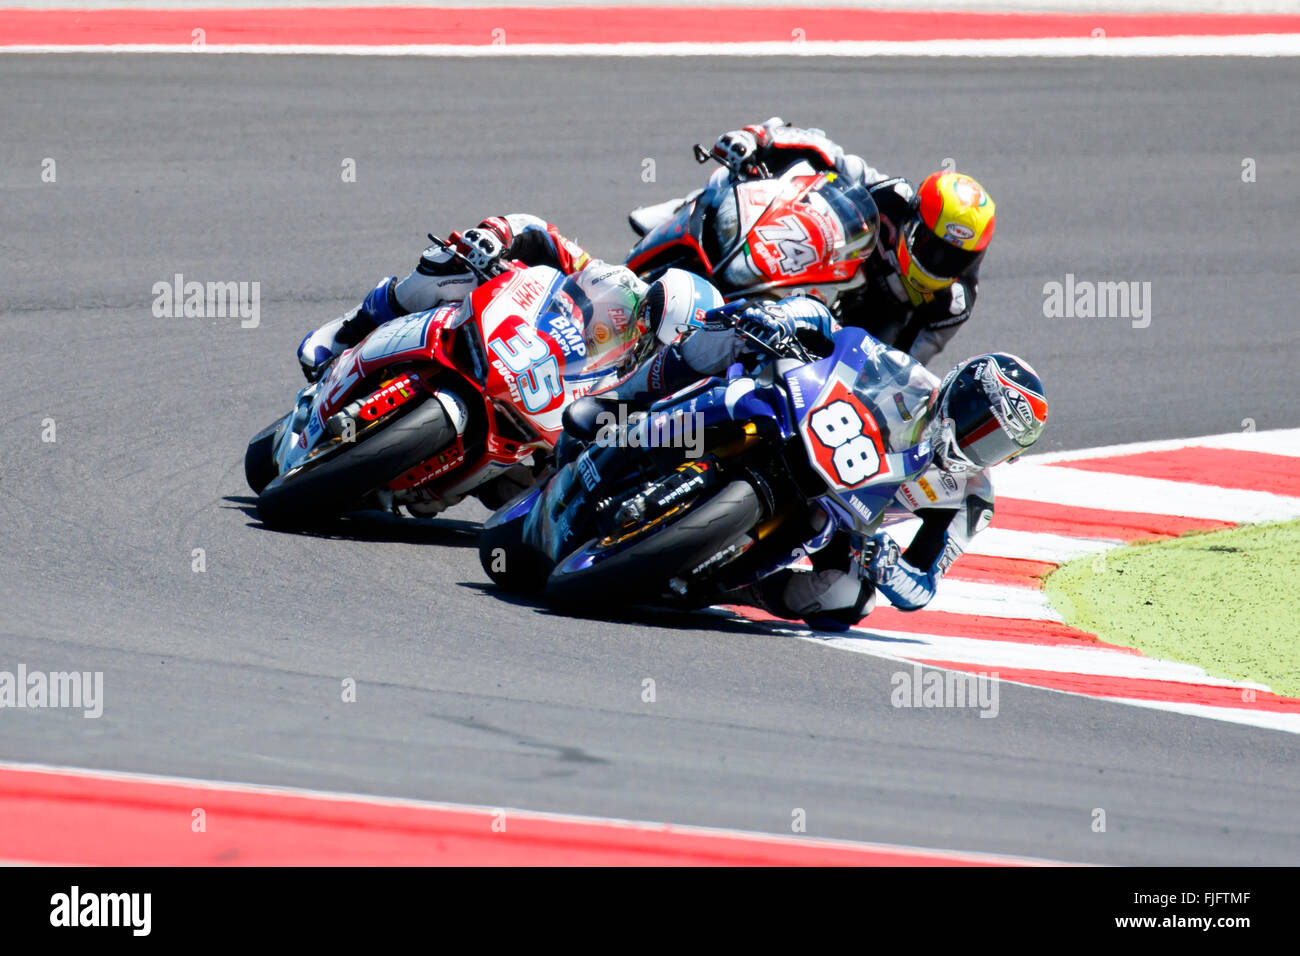 Misano Adriatico, Italy - June 21, 2015: Yamaha YZF R1 of MRS Yamaha Team, driven by COGHLAN Kev in action during the Superstock 1000 Race during the FIM Superstock 1000 - race at Misano World Circuit on June 21, 2015 in Misano Adriatico, Italy. Stock Photo